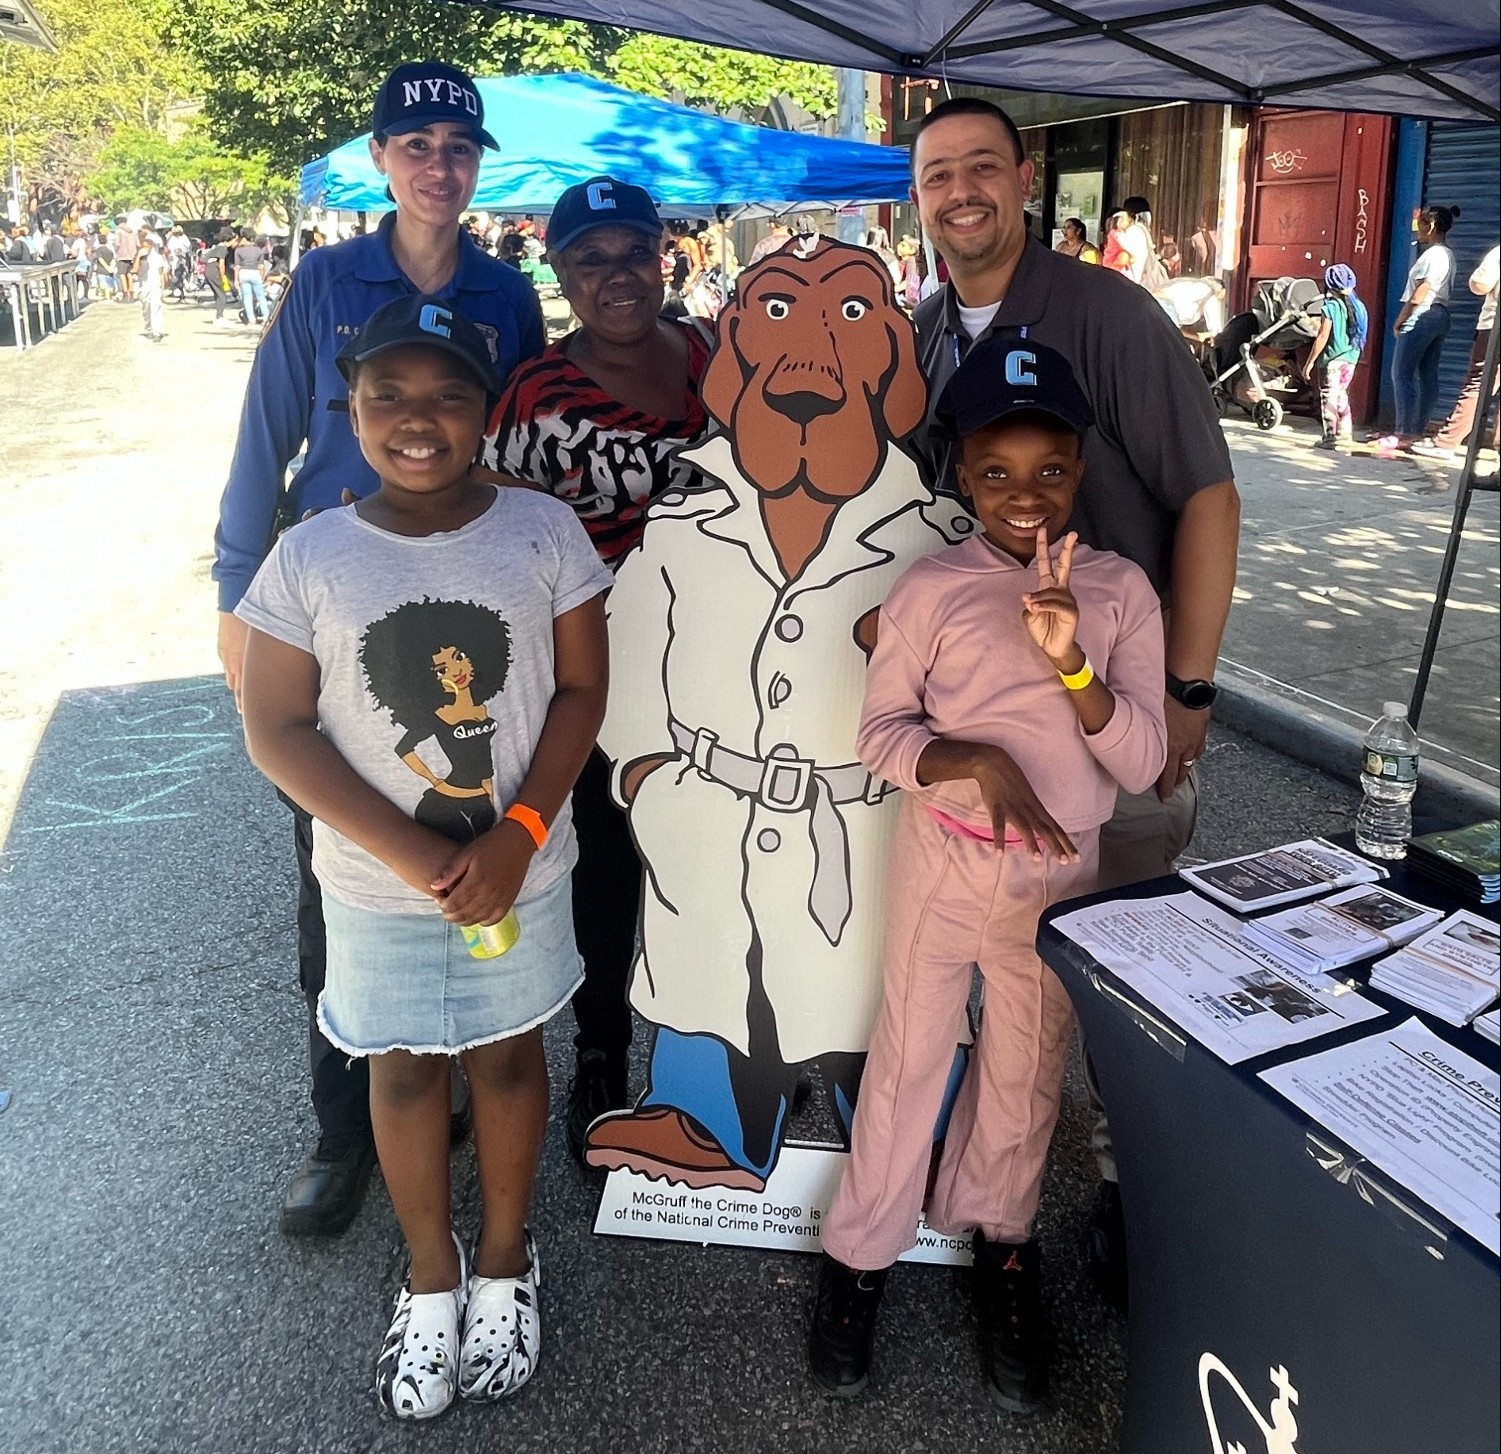 NYPD officer and Public Safety officer pose for a photo with two children and a woman at the annual back to school event